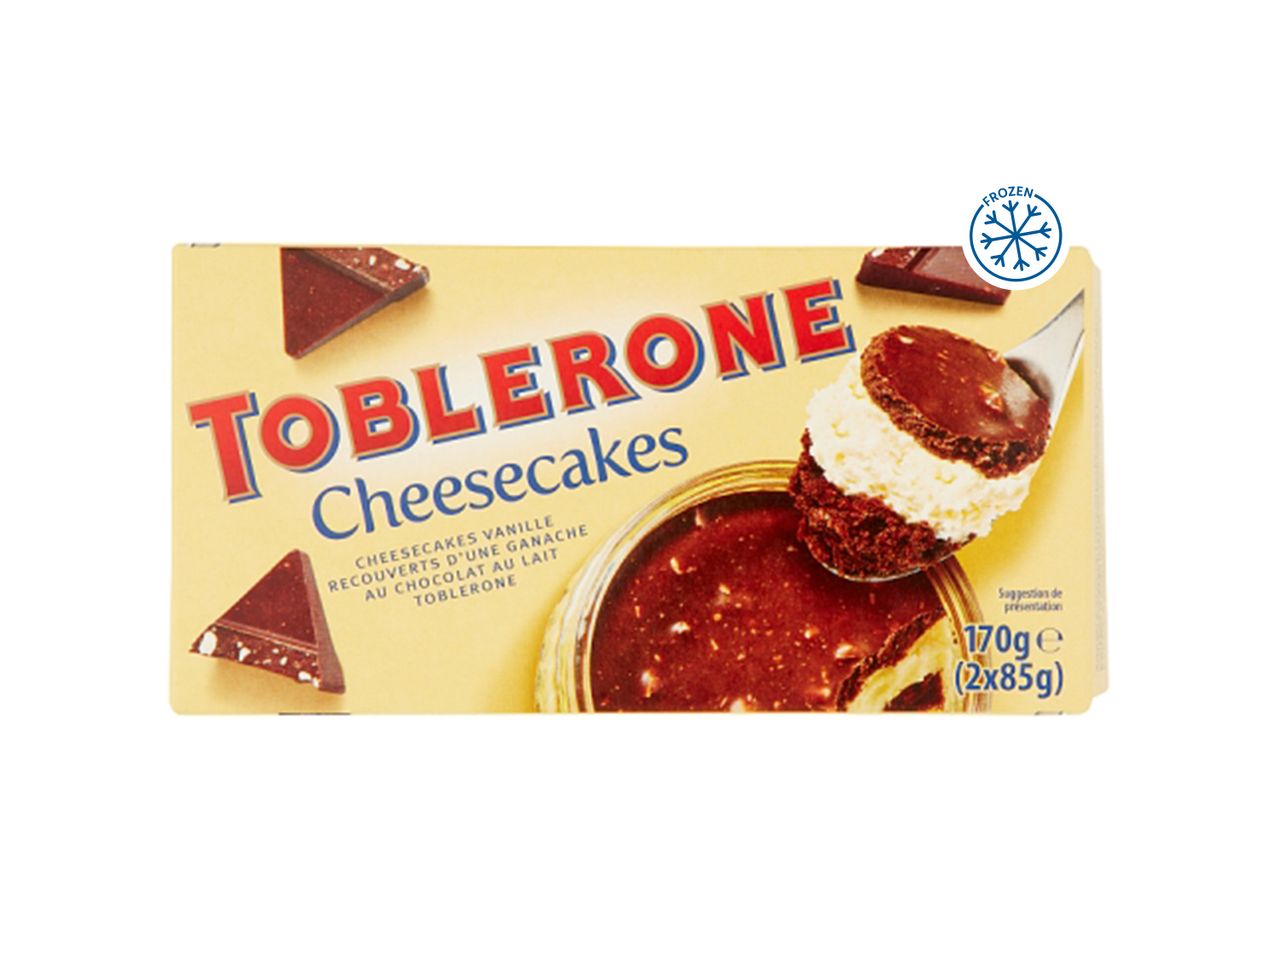 Go to full screen view: Toblerone Cheesecake - Image 1